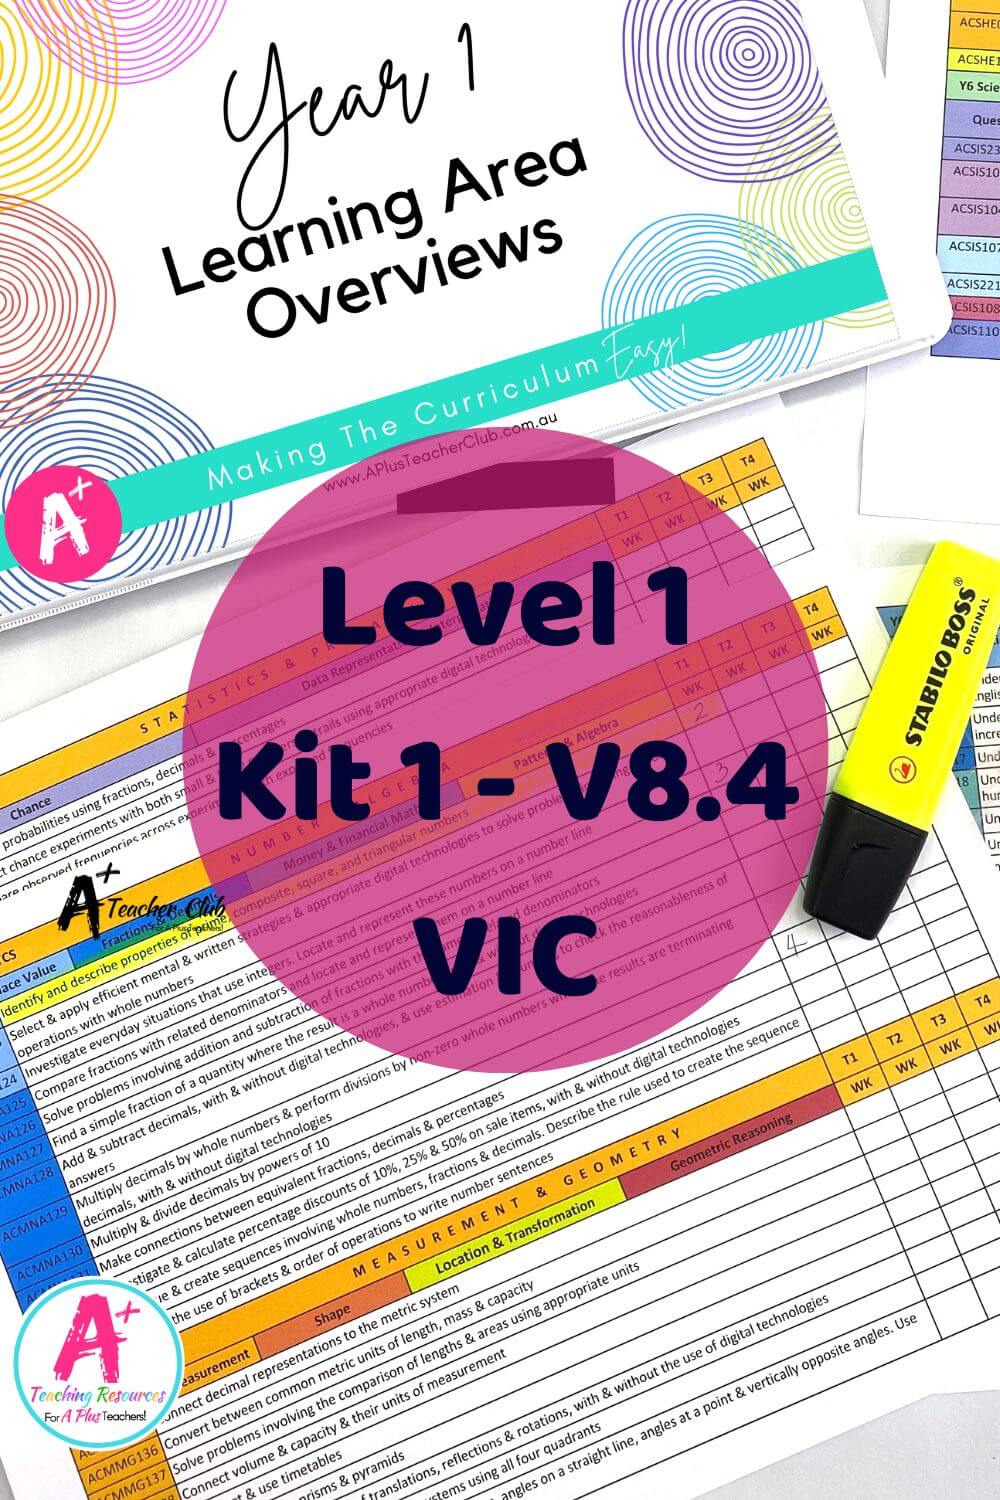 Level 1 Forward Planning Curriculum Overview VIC 8.4